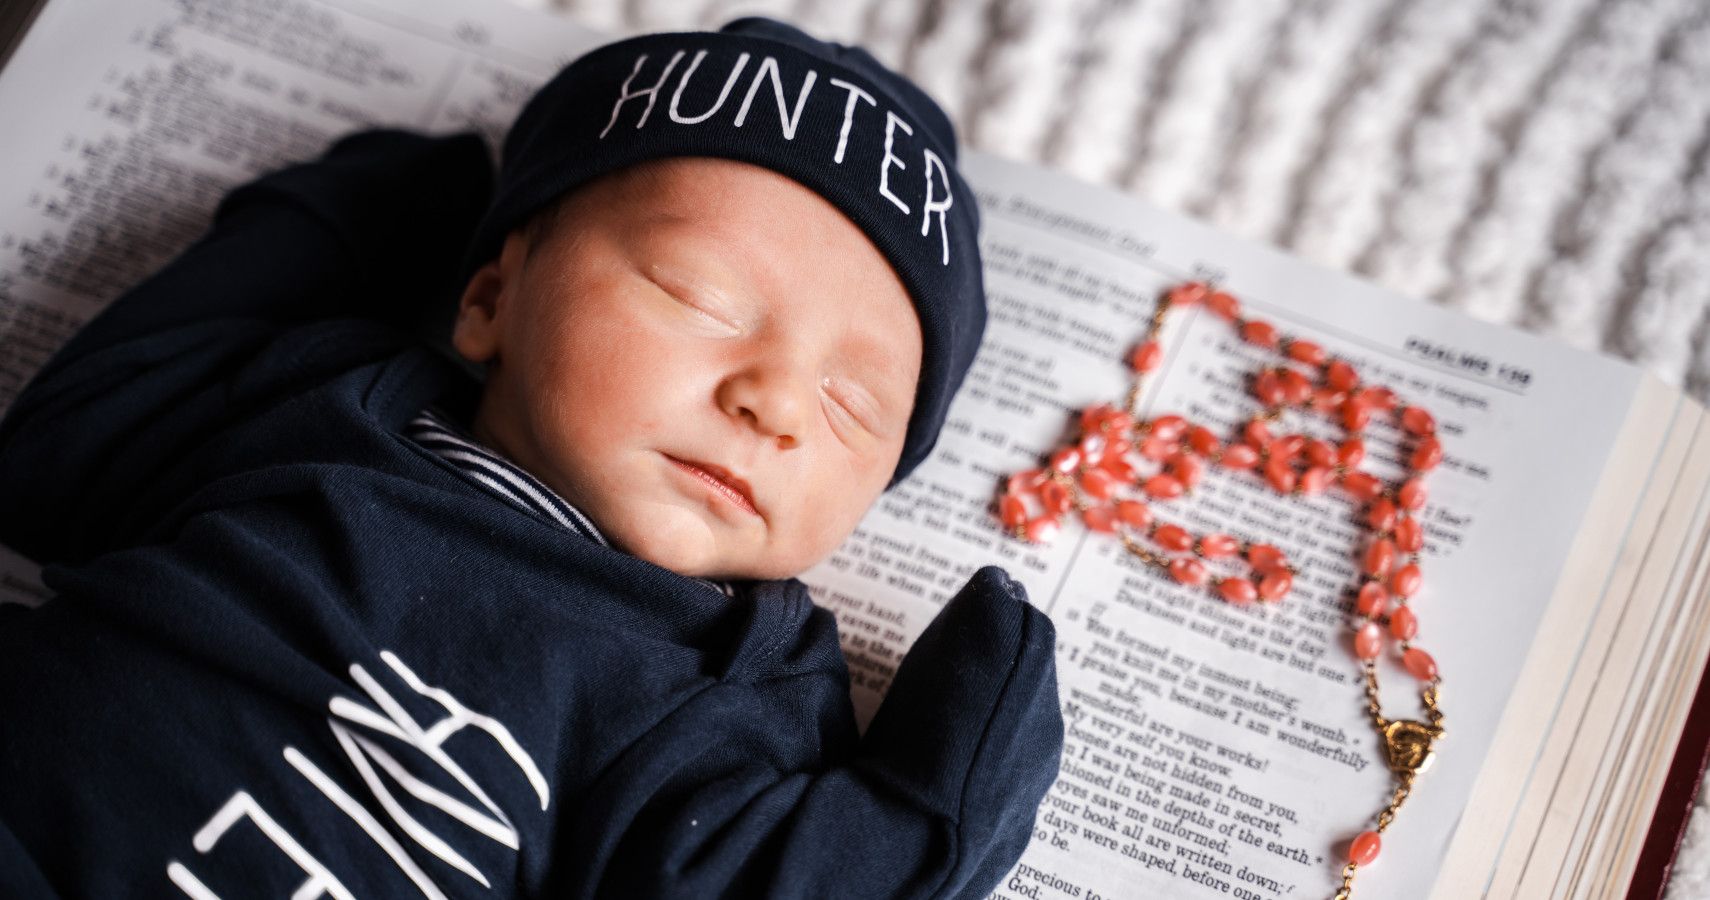 A baby fast asleep on the Bible.